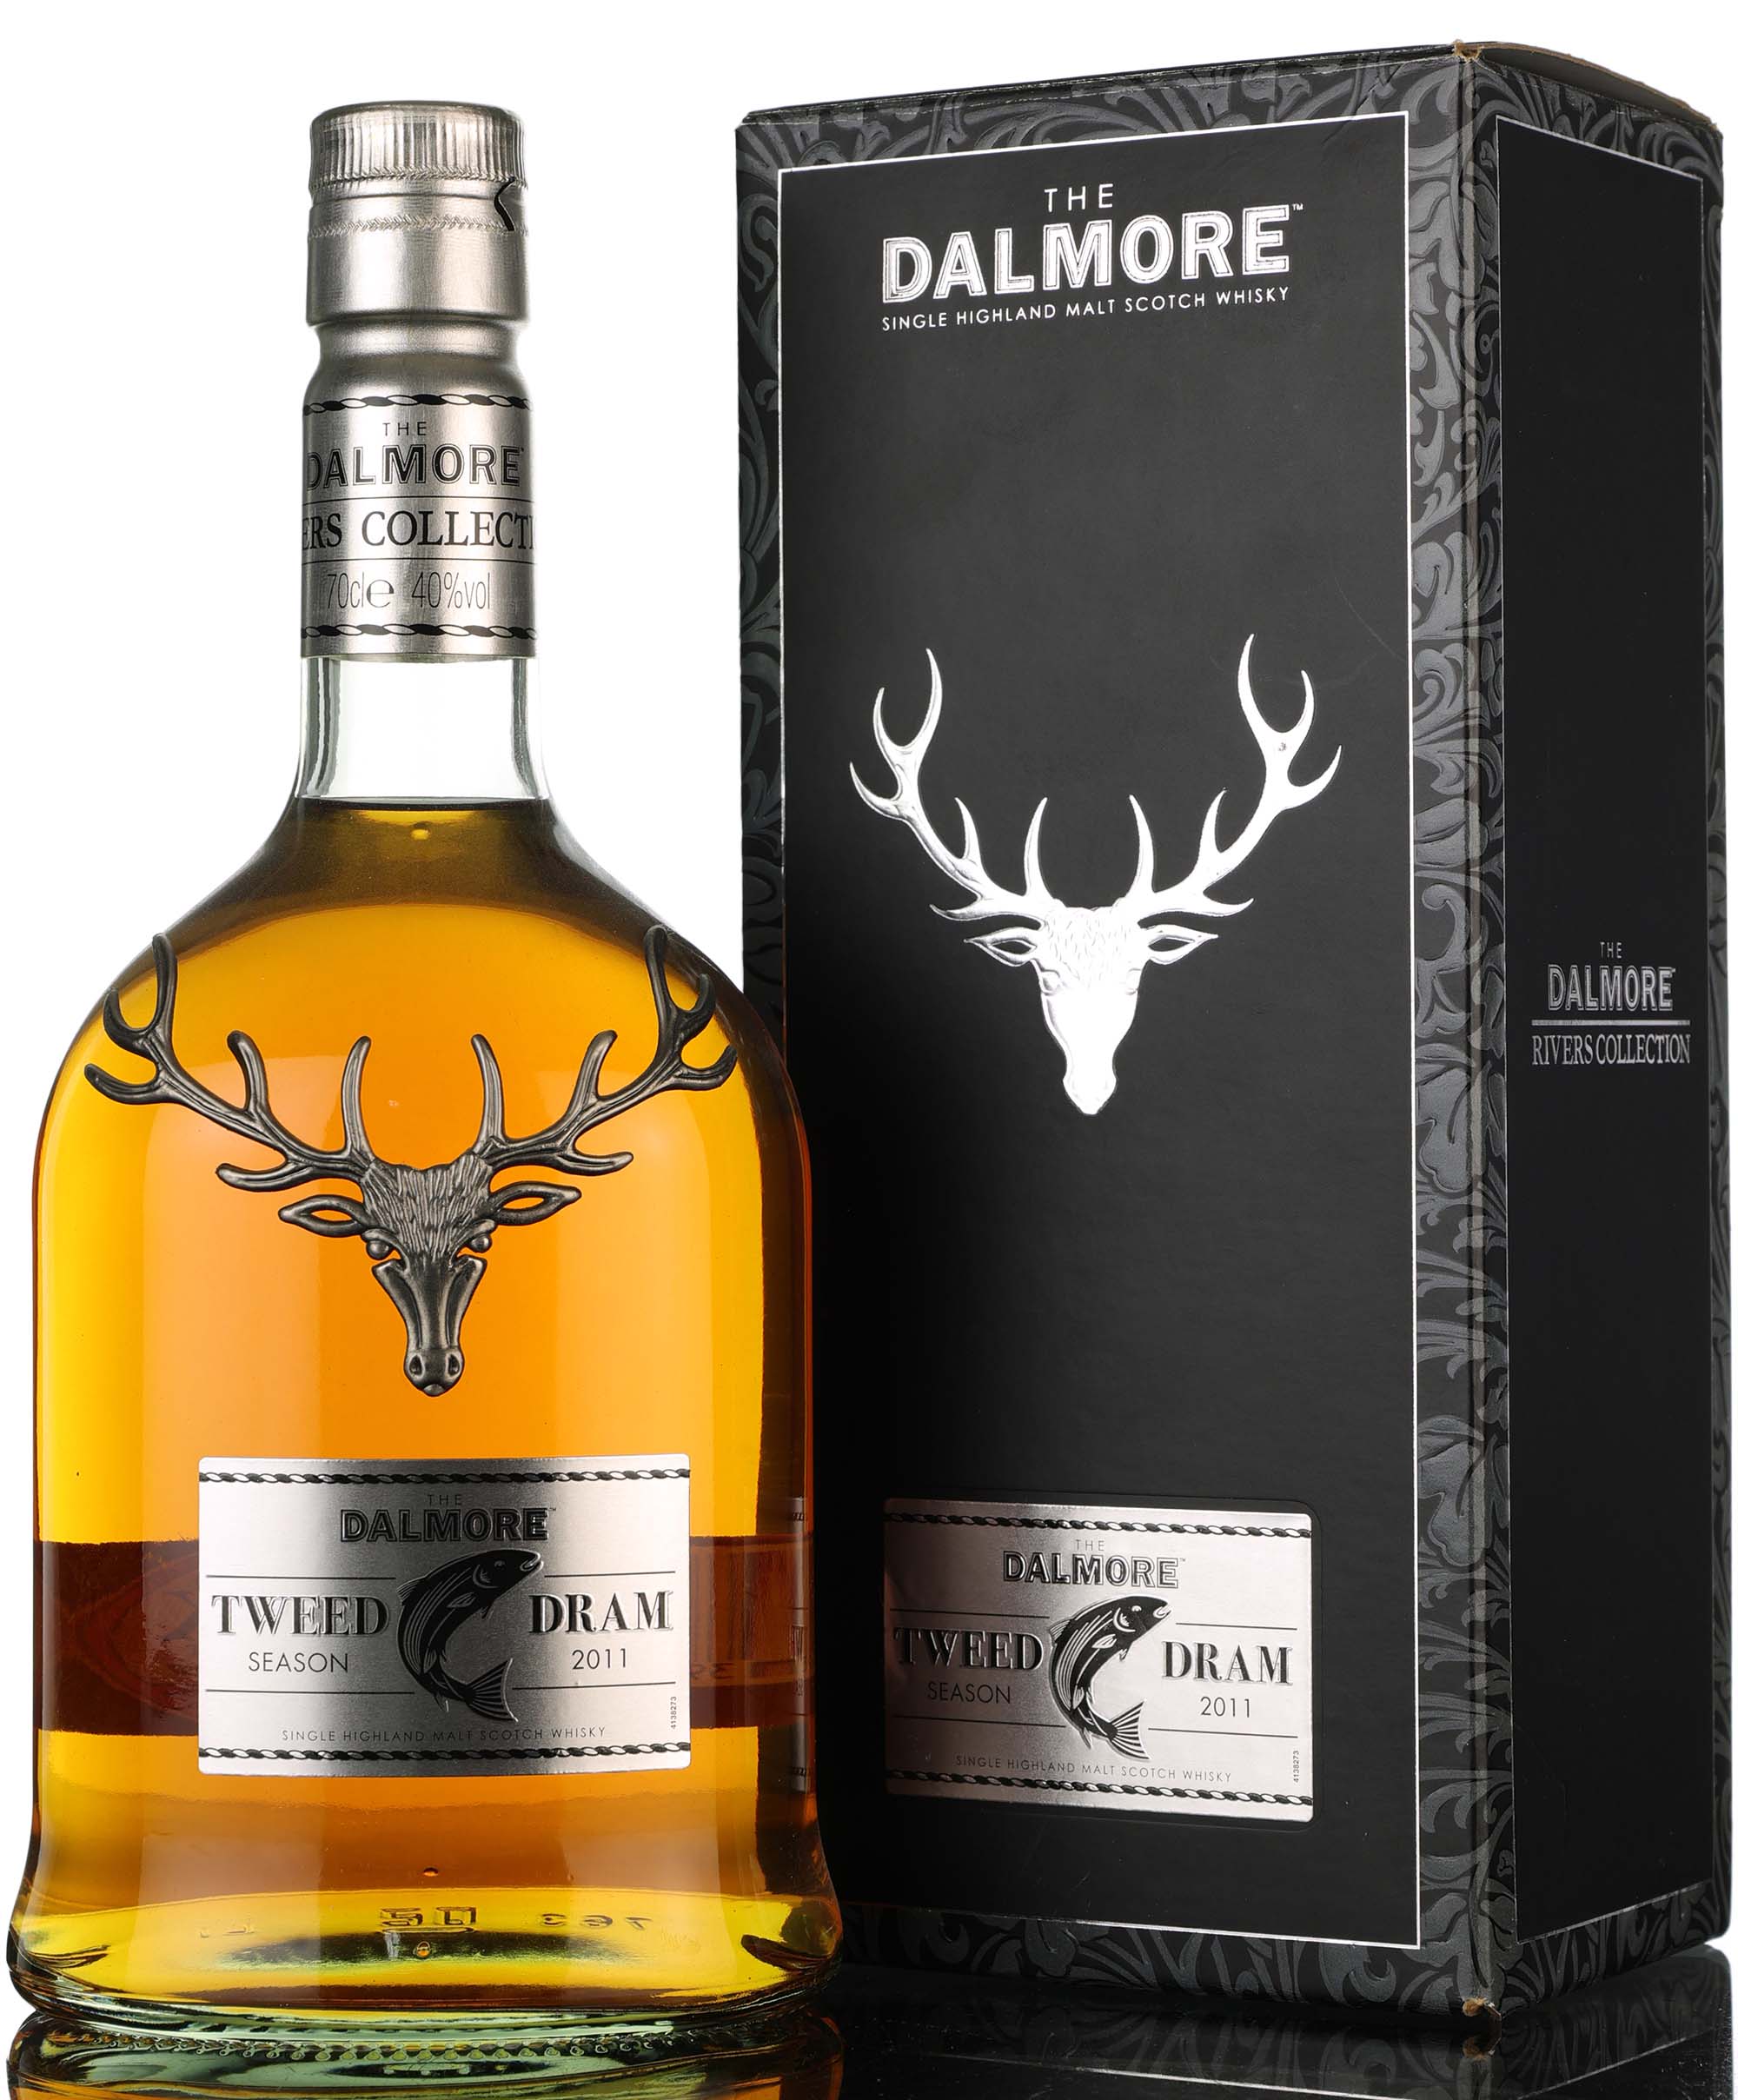 Dalmore Rivers Collection - Tweed Dram - 2011 Release